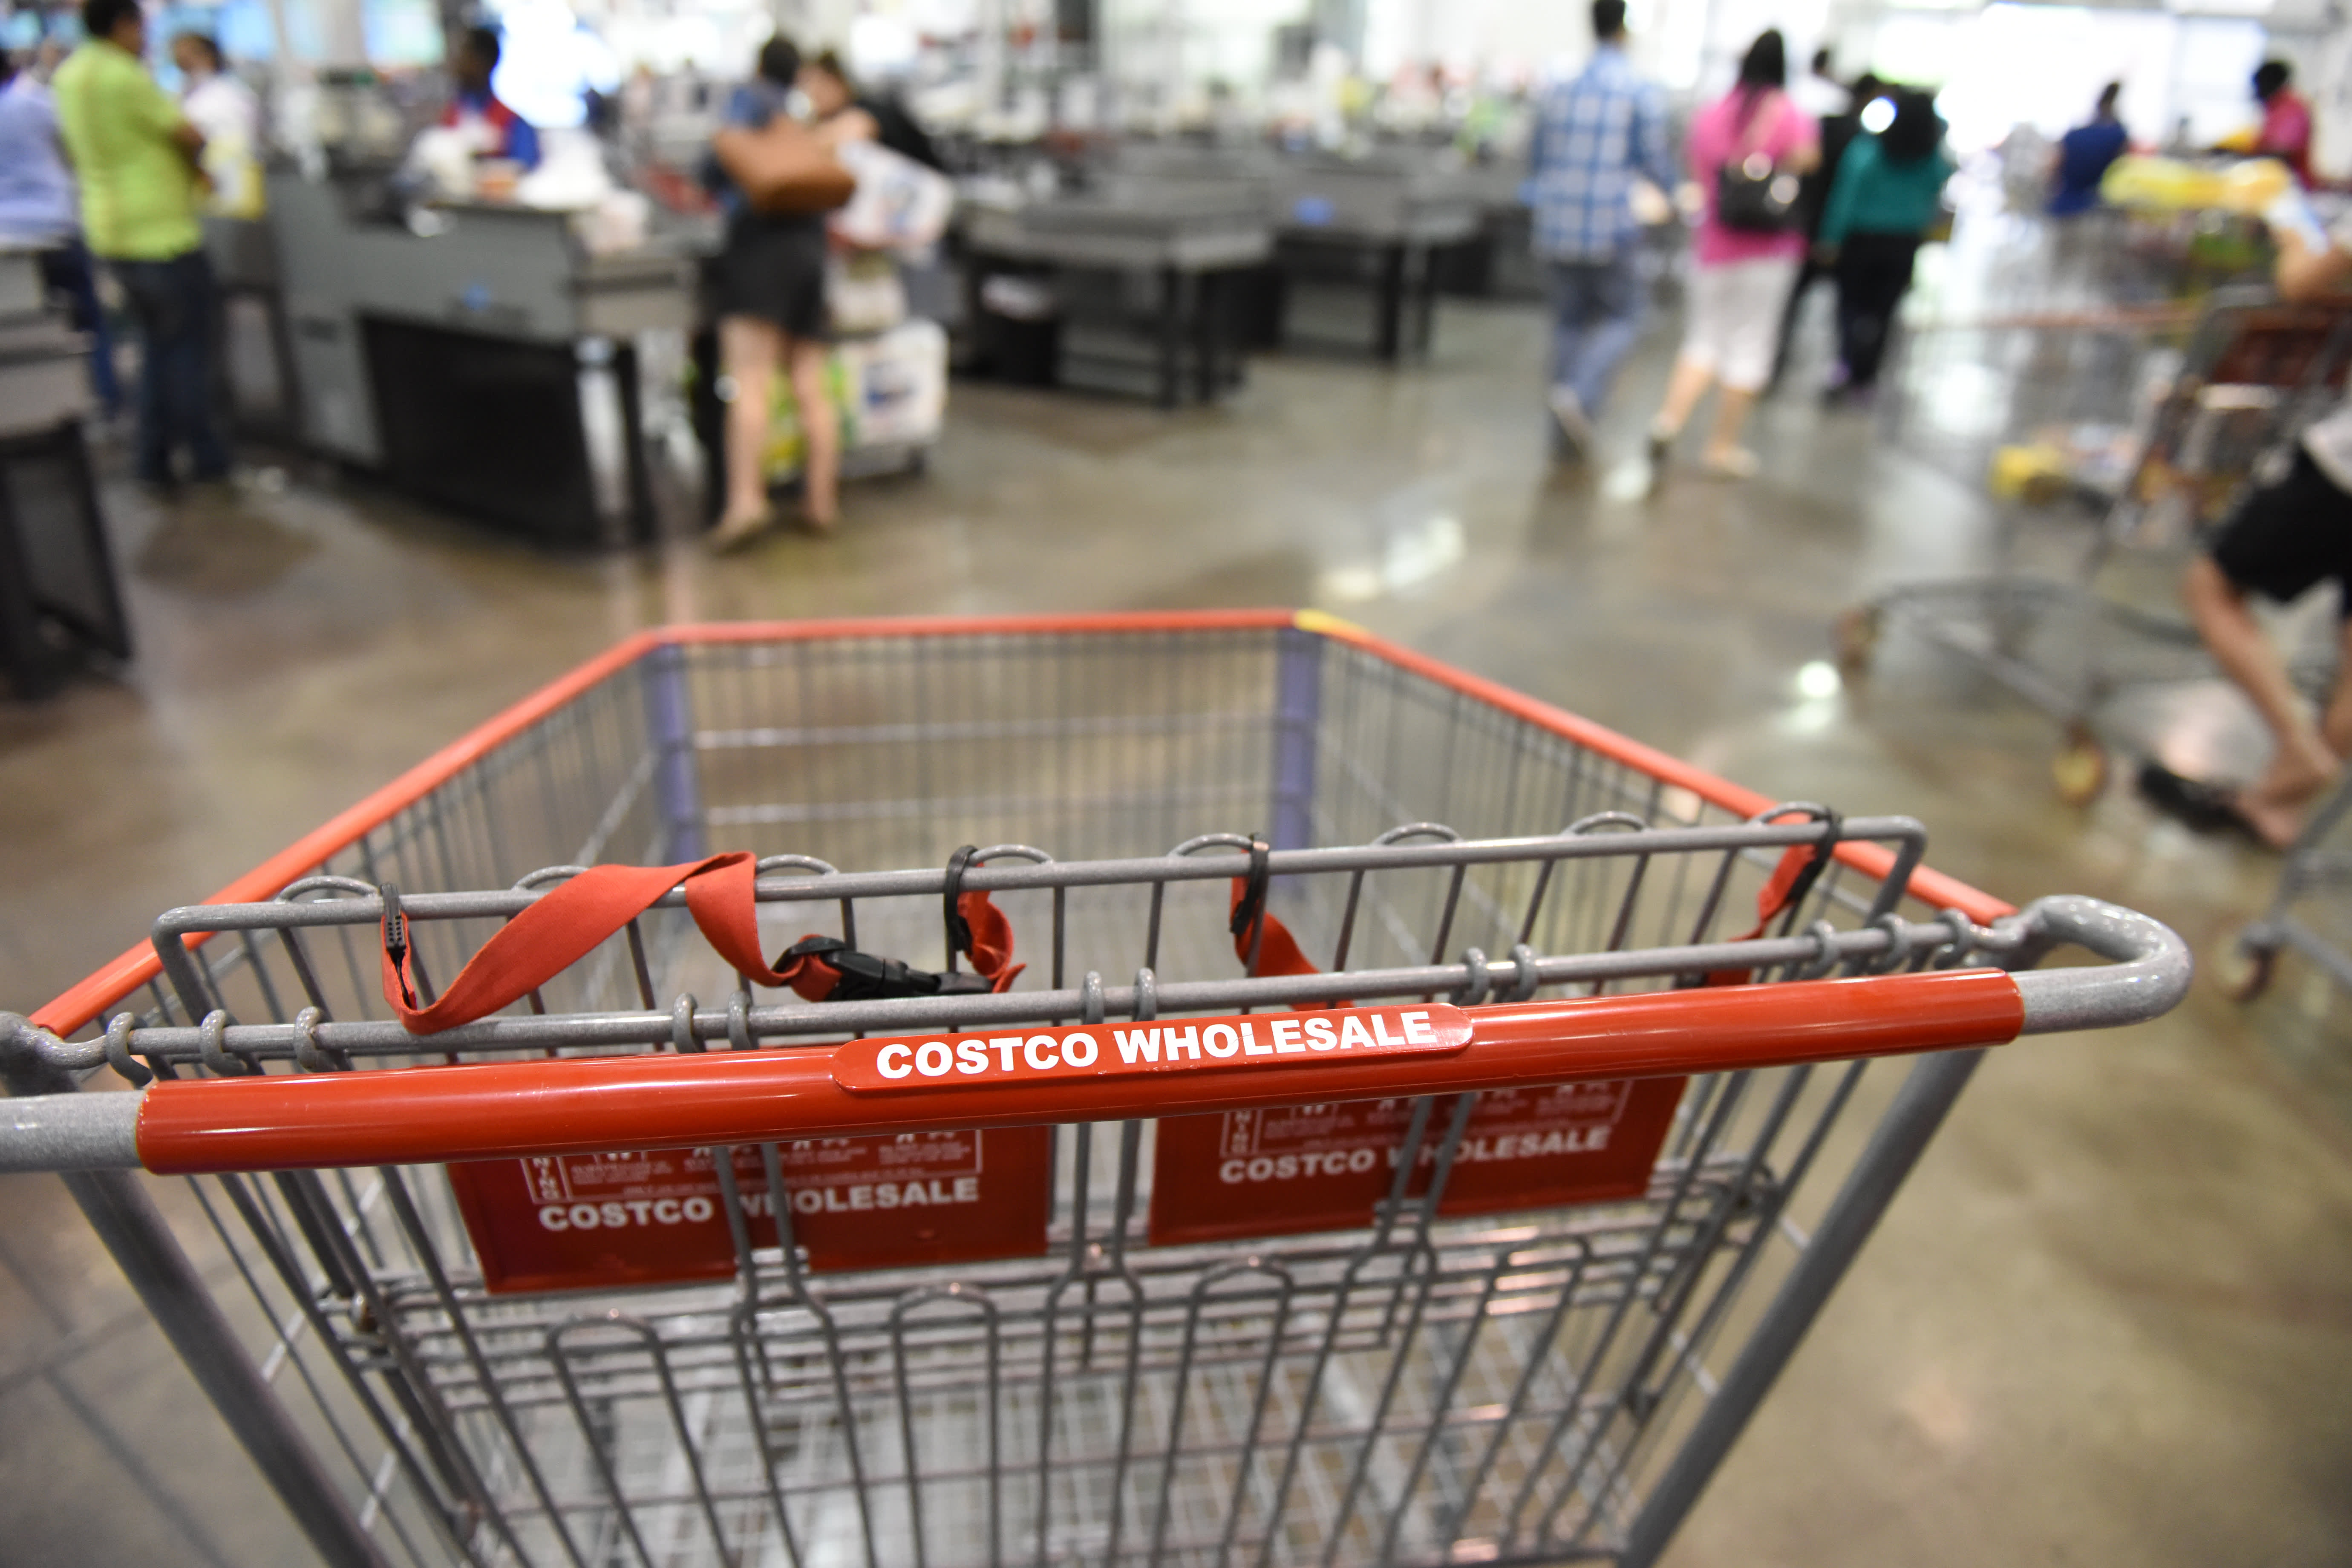 How to Check Item Availability at Costco